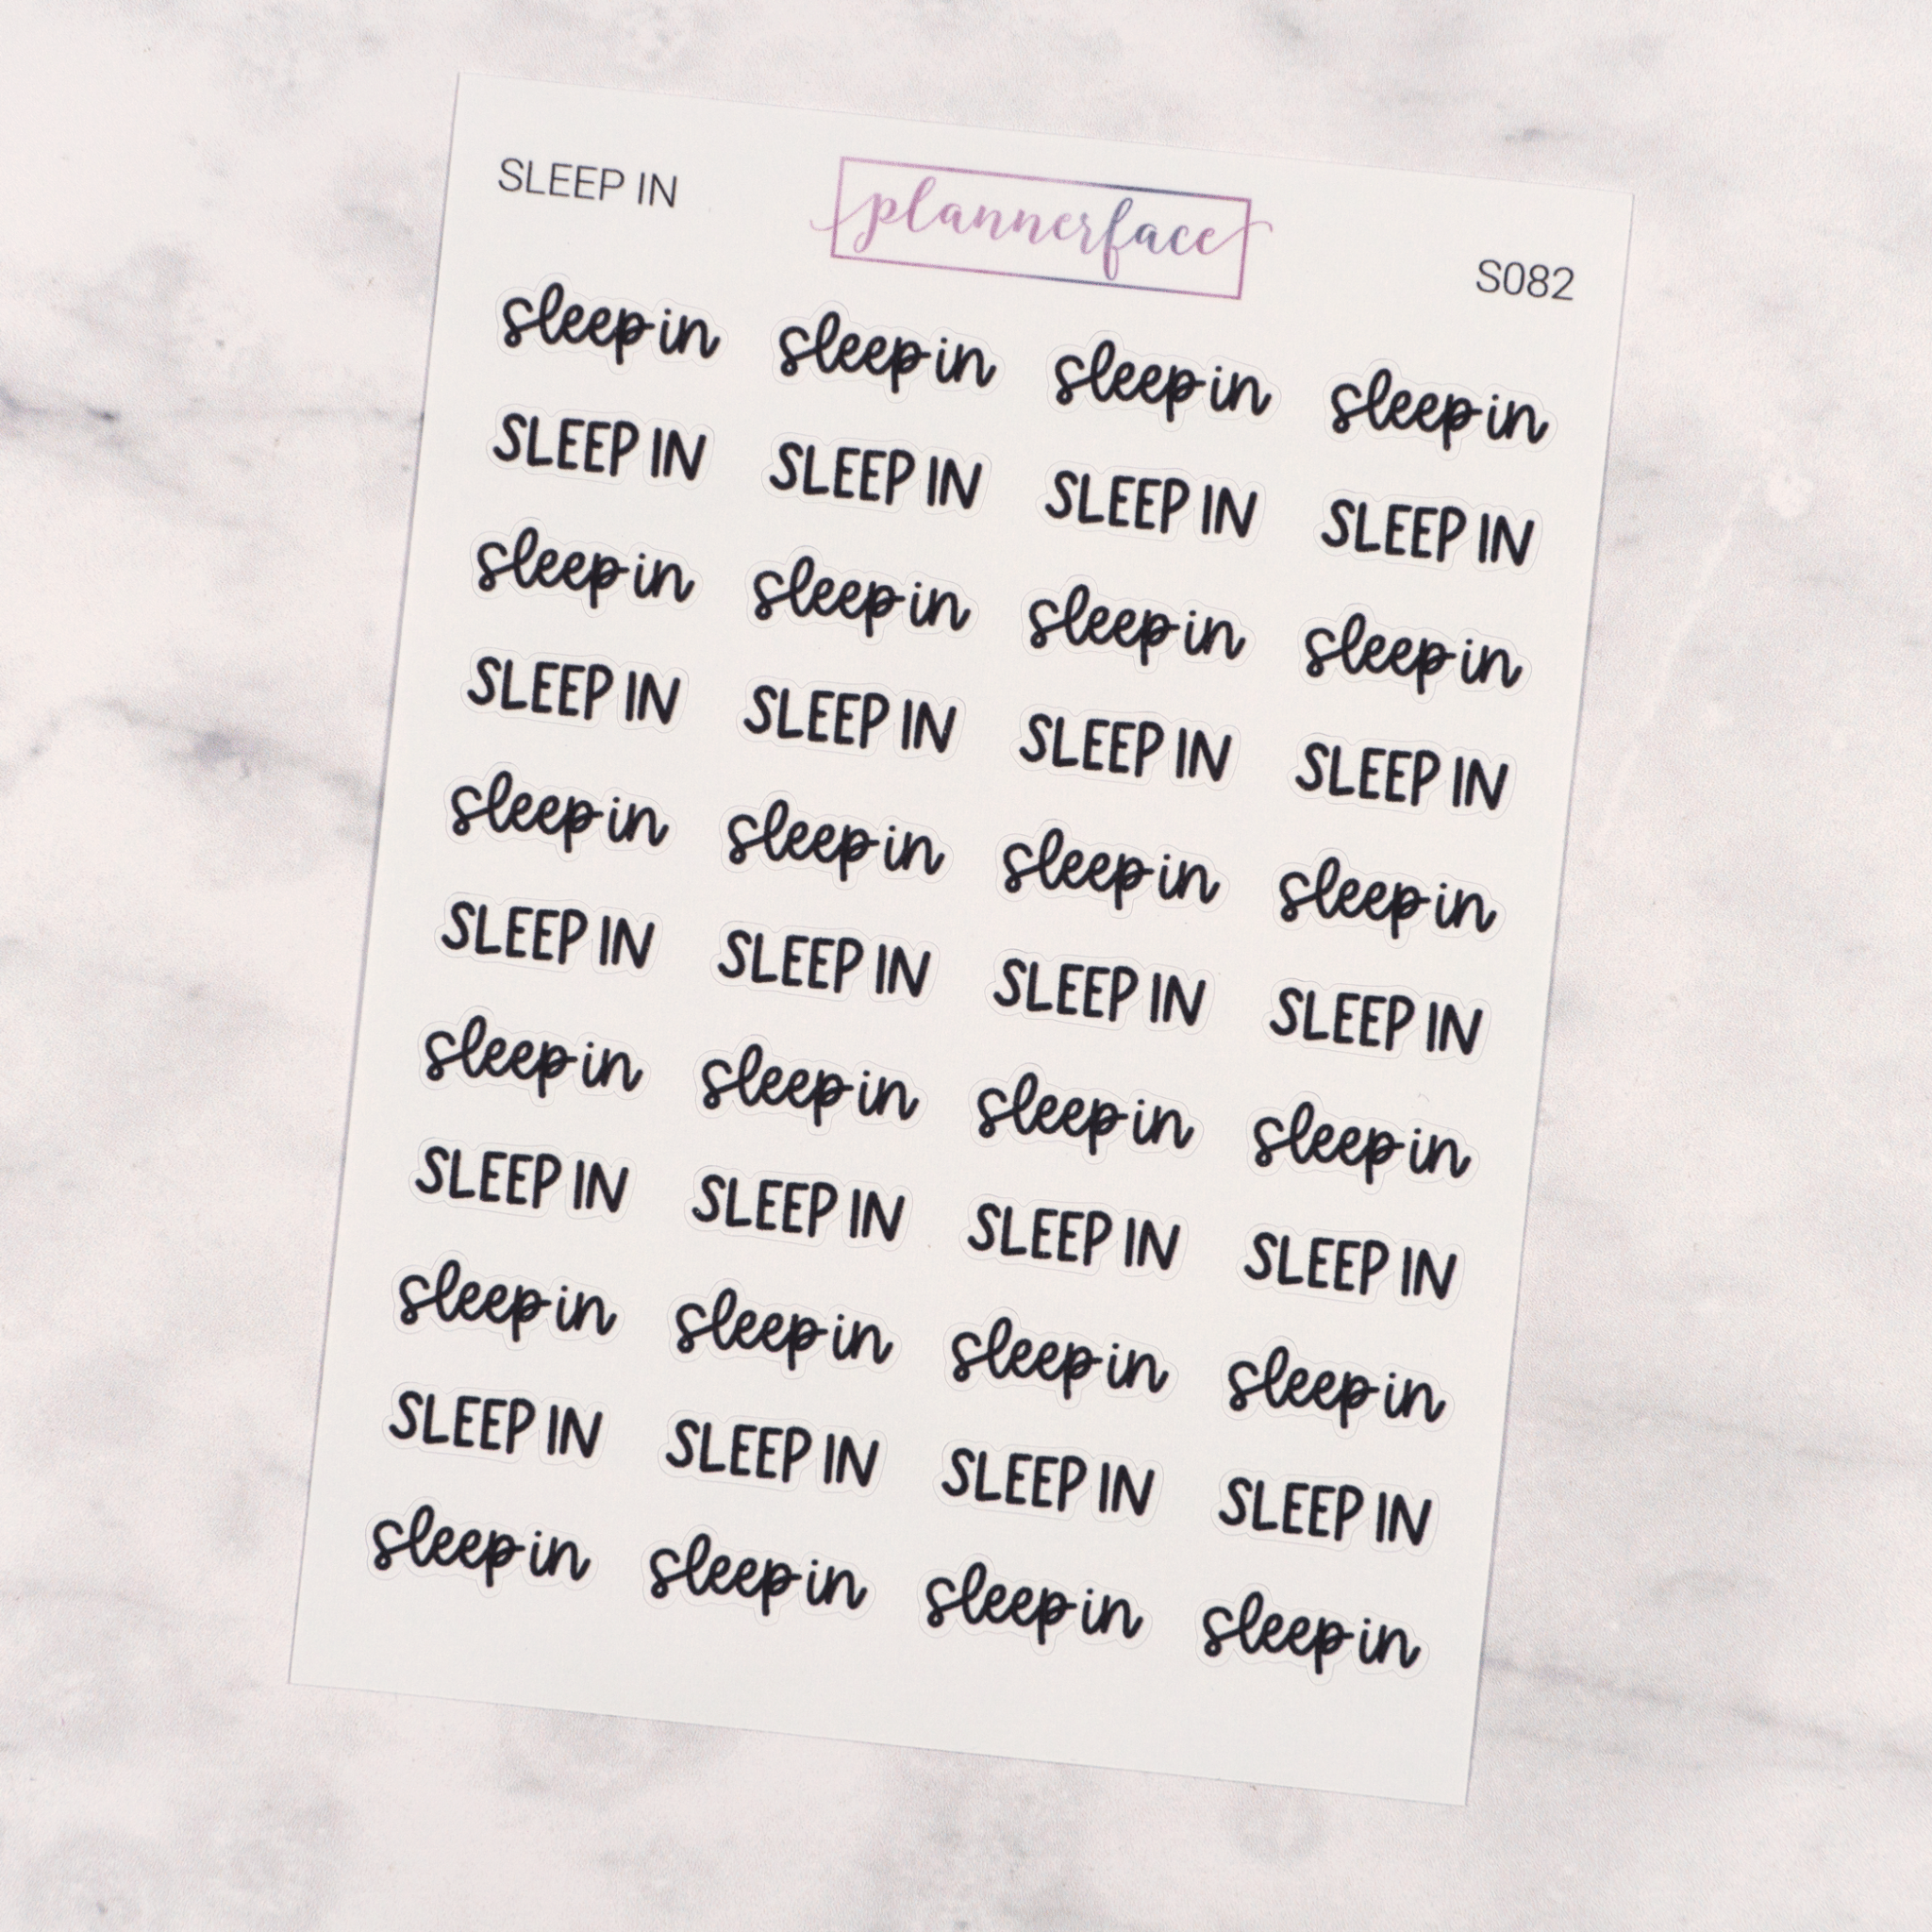 Sleep In | Scripts by Plannerface